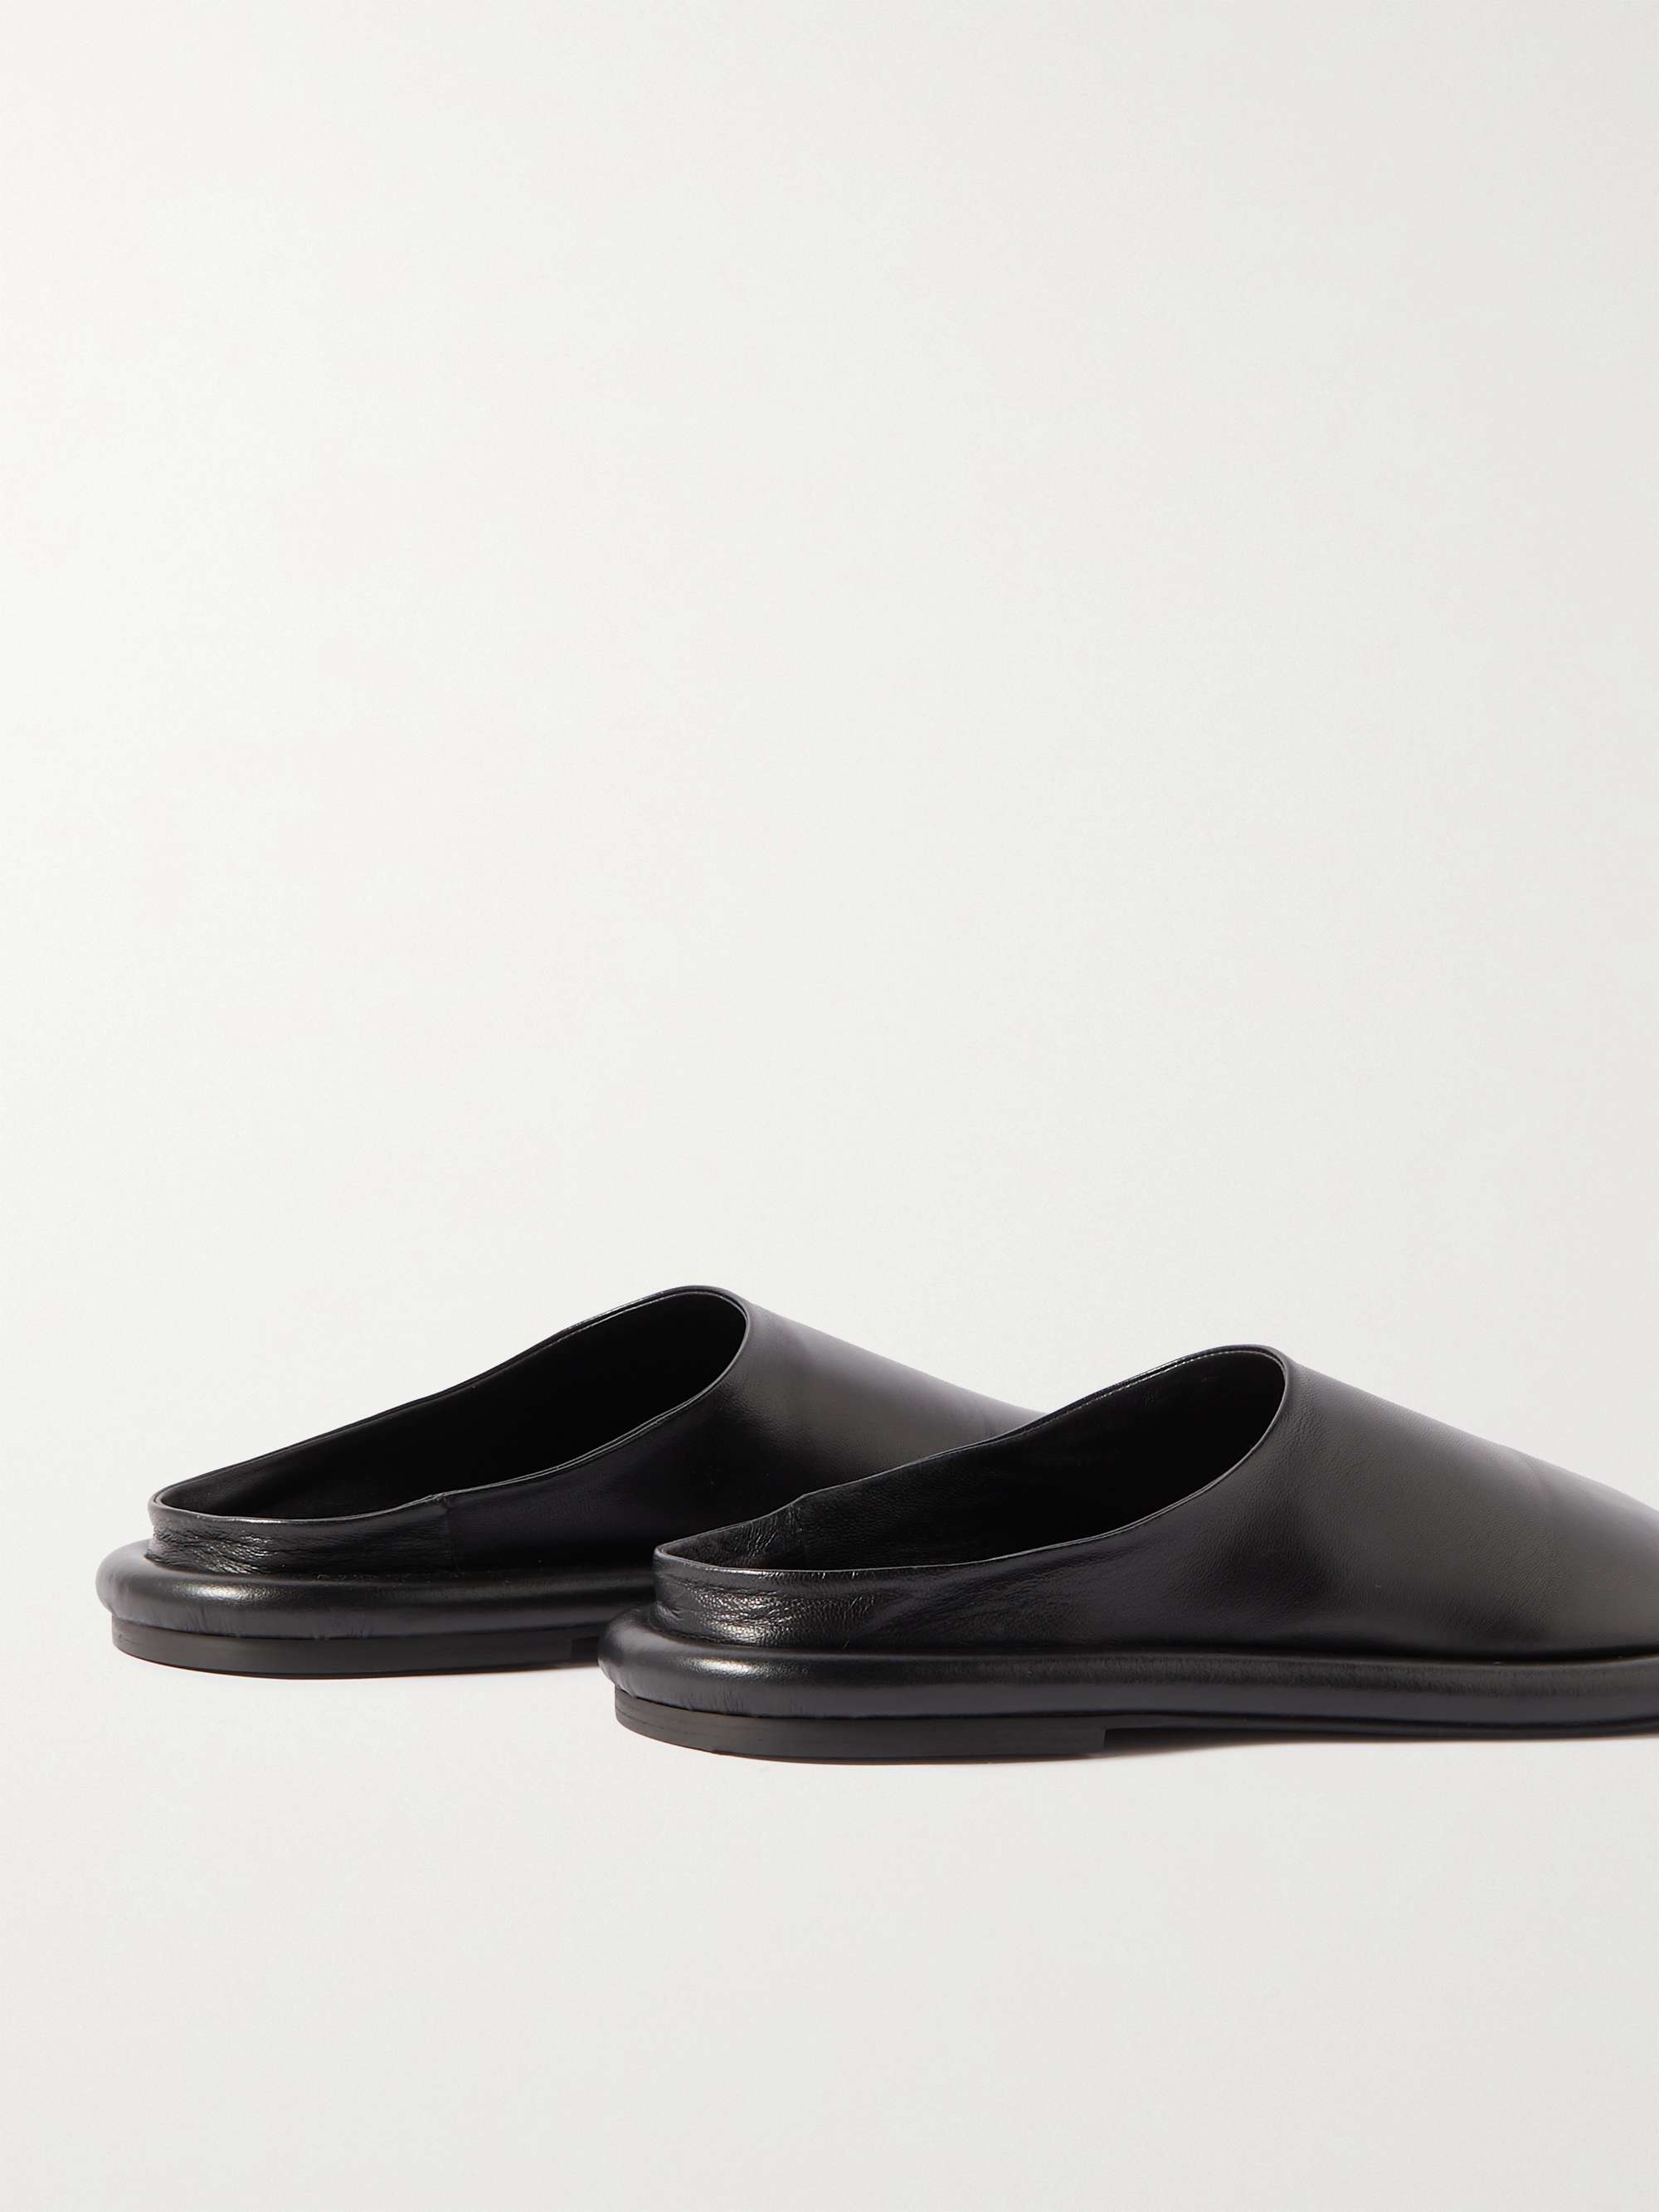 JW ANDERSON Leather Slippers